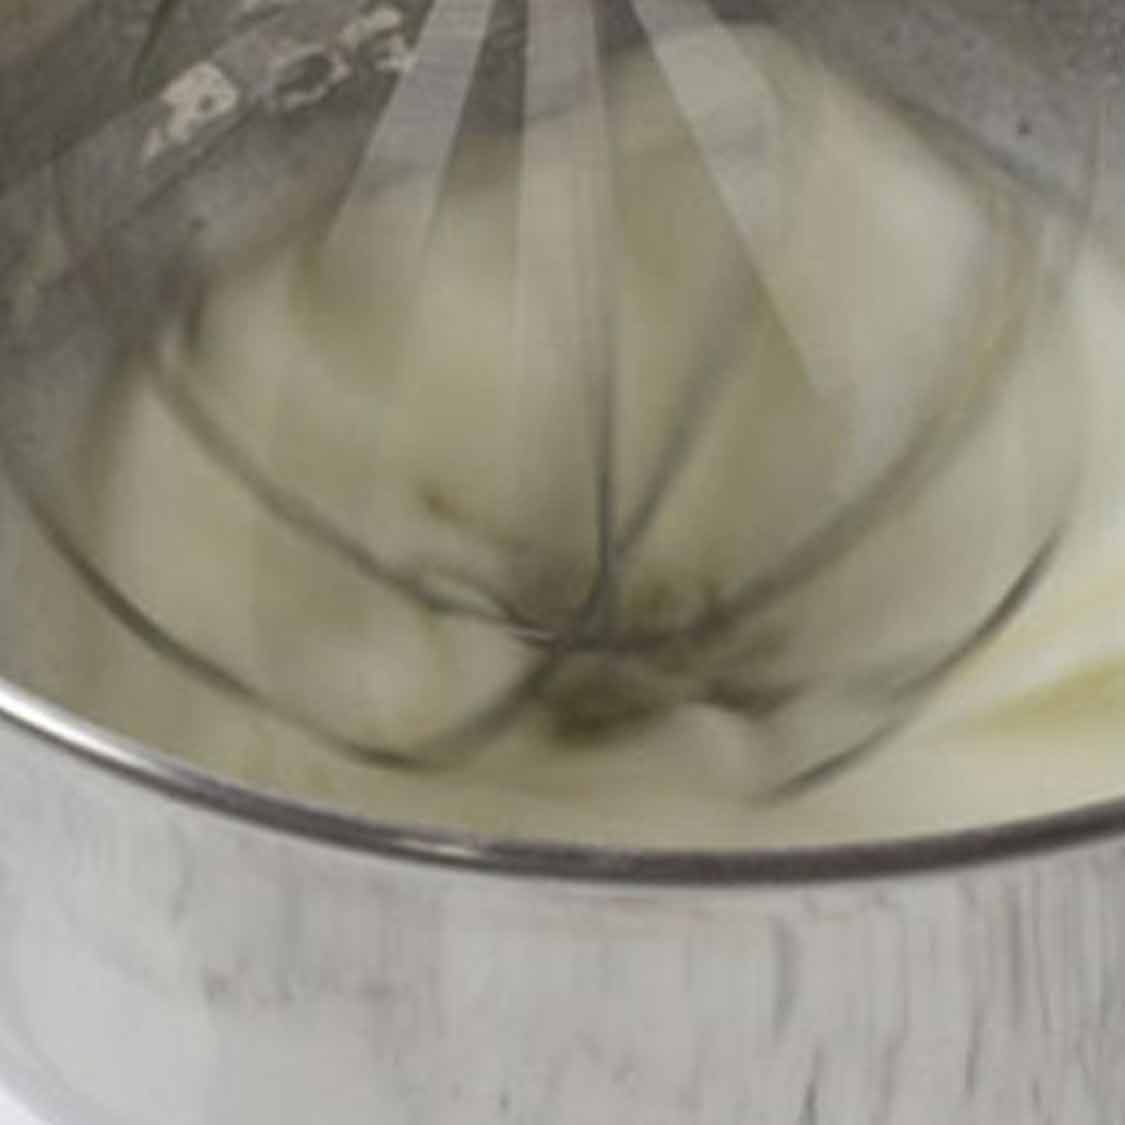 beating egg whites in a mixer